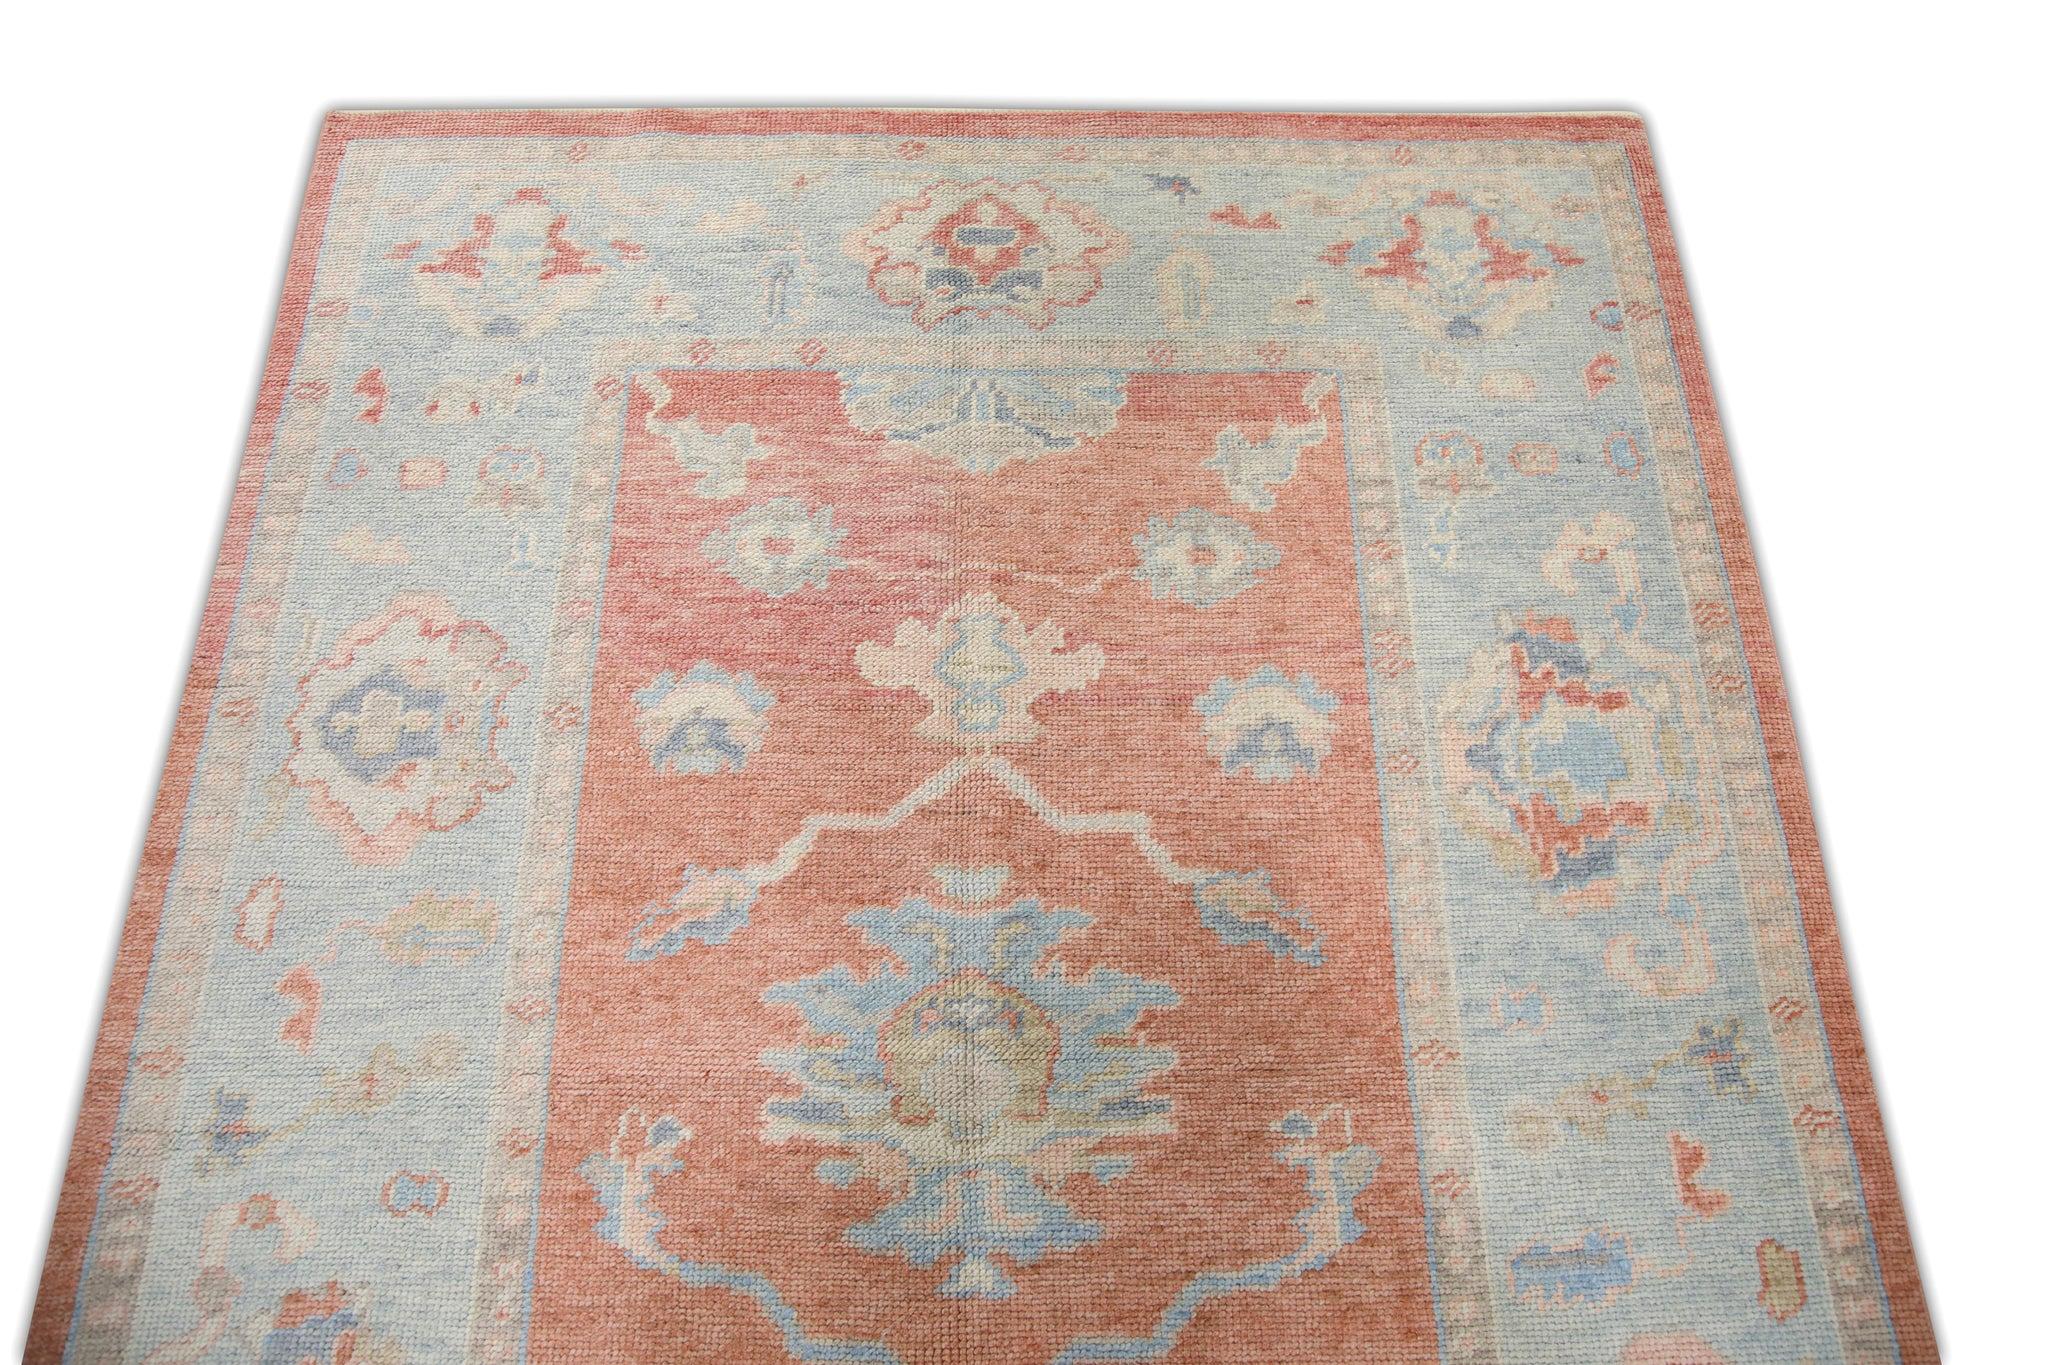 Contemporary Red Handwoven Wool Turkish Oushak Rug in Blue Floral Pattern 4'9